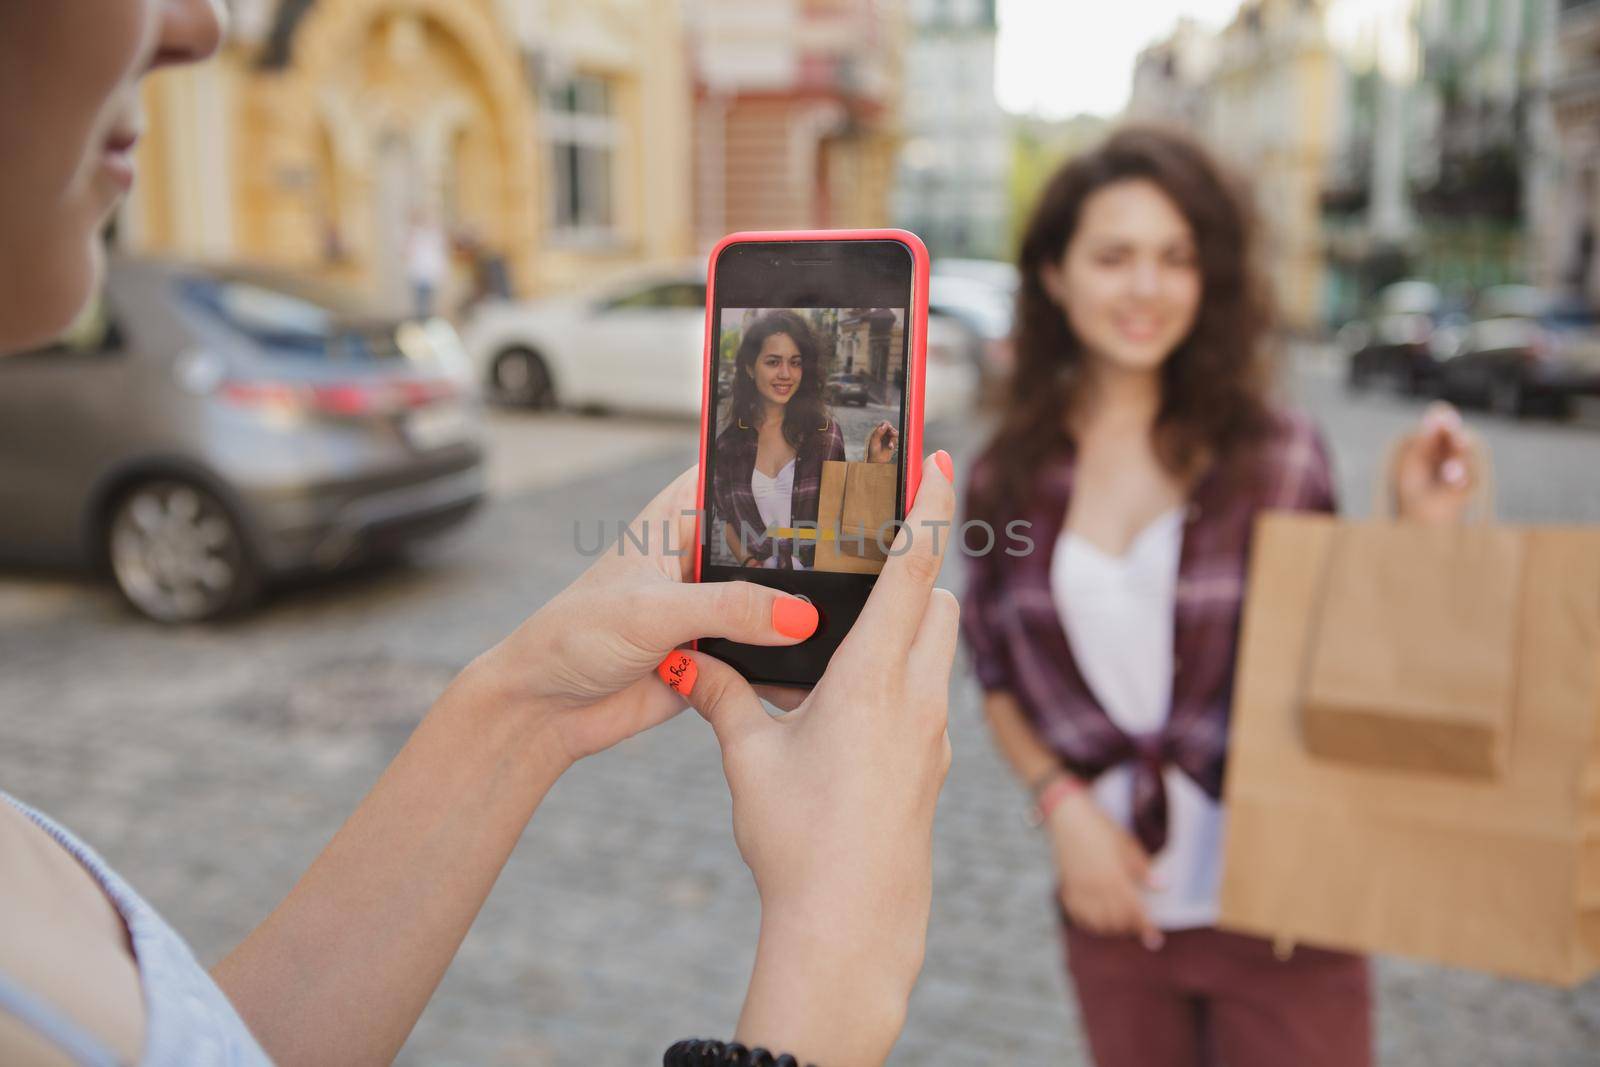 Cropped close up of a smart phone in the hands of a woman taking photo of her friend on the city streets. Female friends enjoying sightseeing and taking photos after shopping